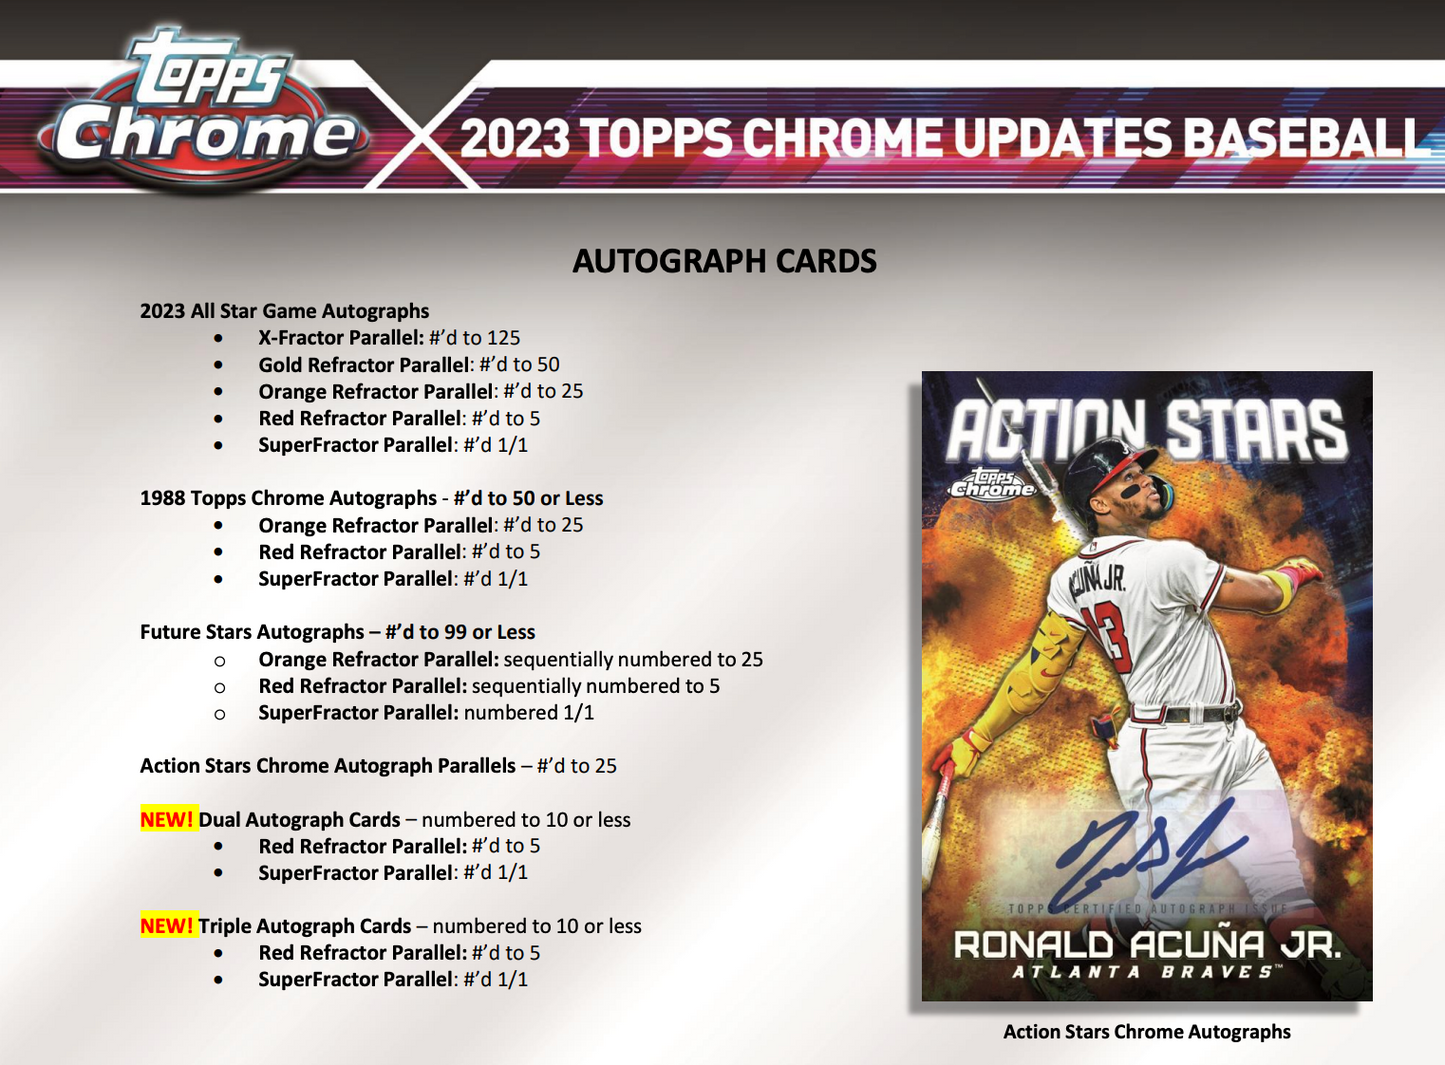 Pre-Sale 2023 Topps Chrome Updates Hobby Case - in shop pickup 11/17